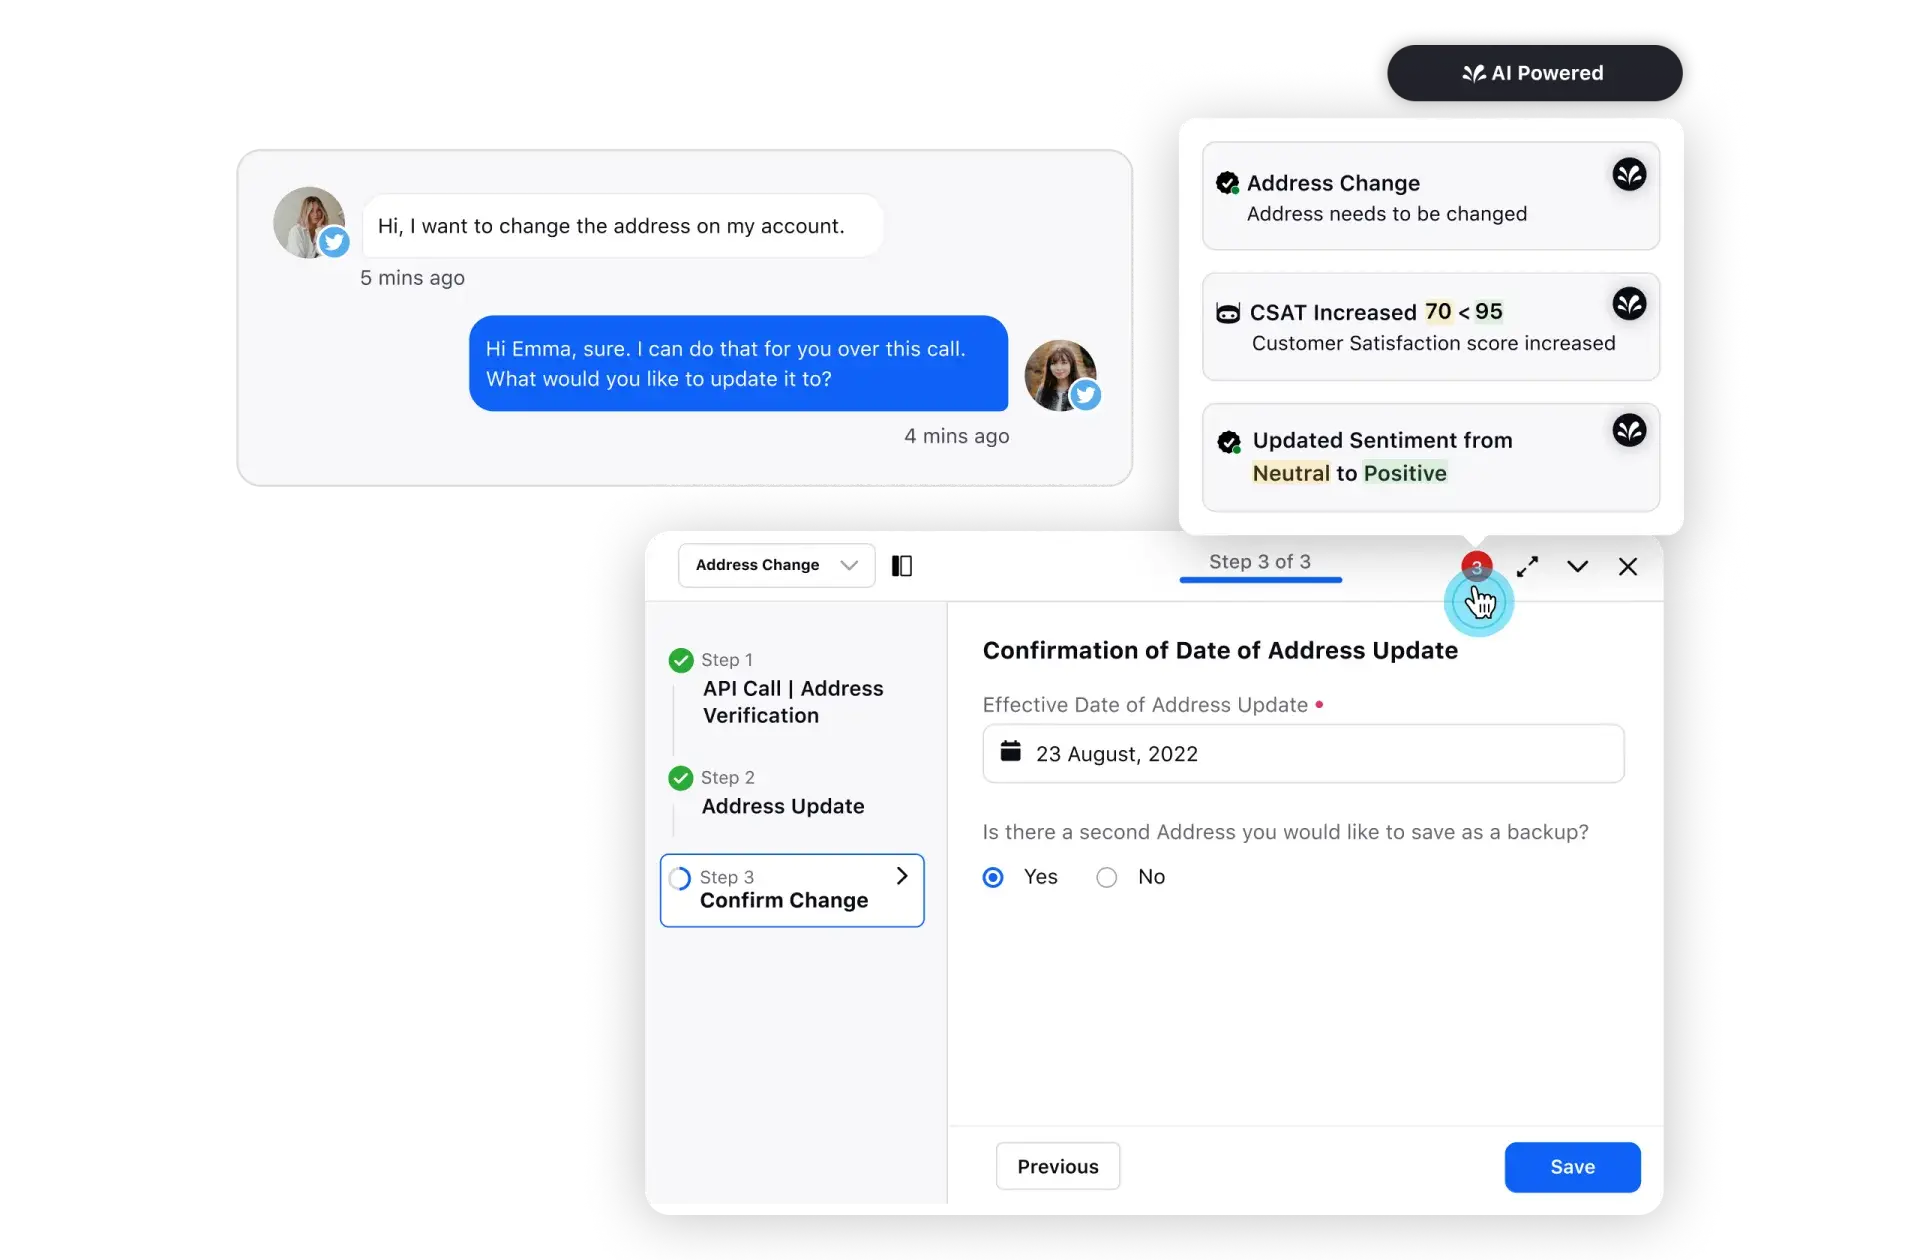 Empower agents with real-time assistance powered by Sprinklr AI+